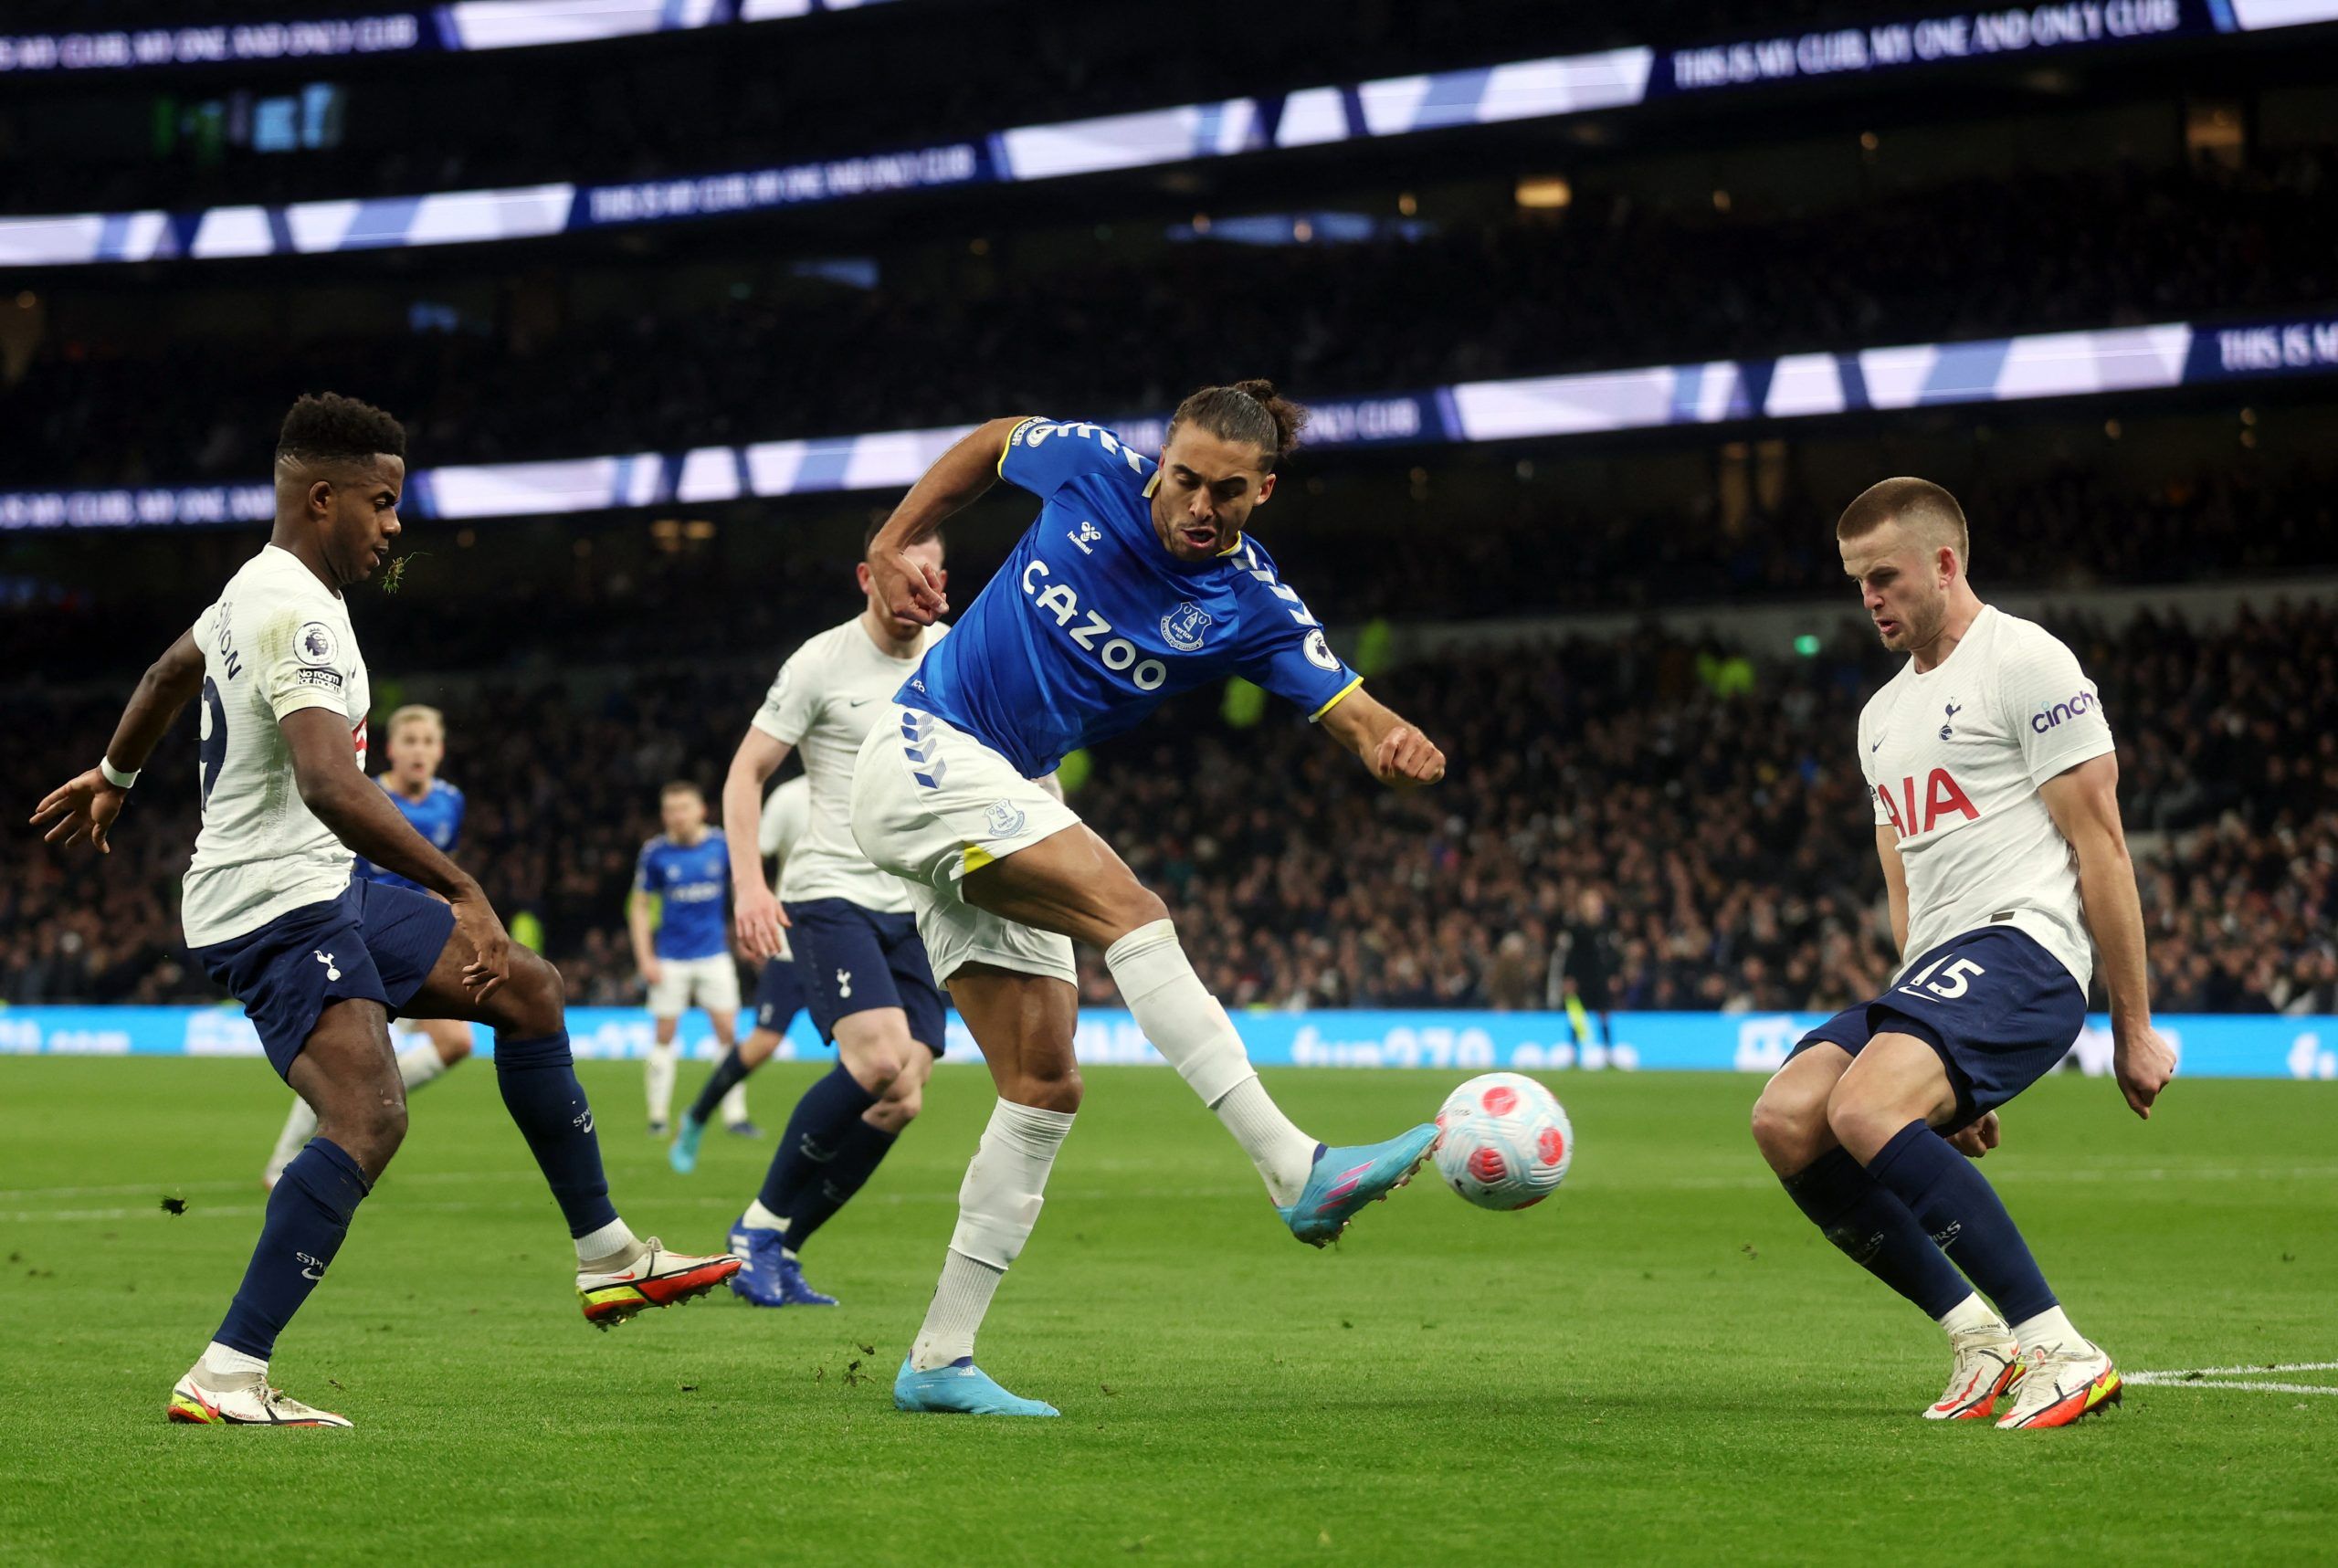 Soccer Football - Premier League - Tottenham Hotspur v Everton - Tottenham Hotspur Stadium, London, Britain - March 7, 2022 Everton's Dominic Calvert-Lewin in action with Tottenham Hotspur's Eric Dier Action Images via Reuters/Matthew Childs EDITORIAL USE ONLY. No use with unauthorized audio, video, data, fixture lists, club/league logos or 'live' services. Online in-match use limited to 75 images, no video emulation. No use in betting, games or single club /league/player publications.  Please c